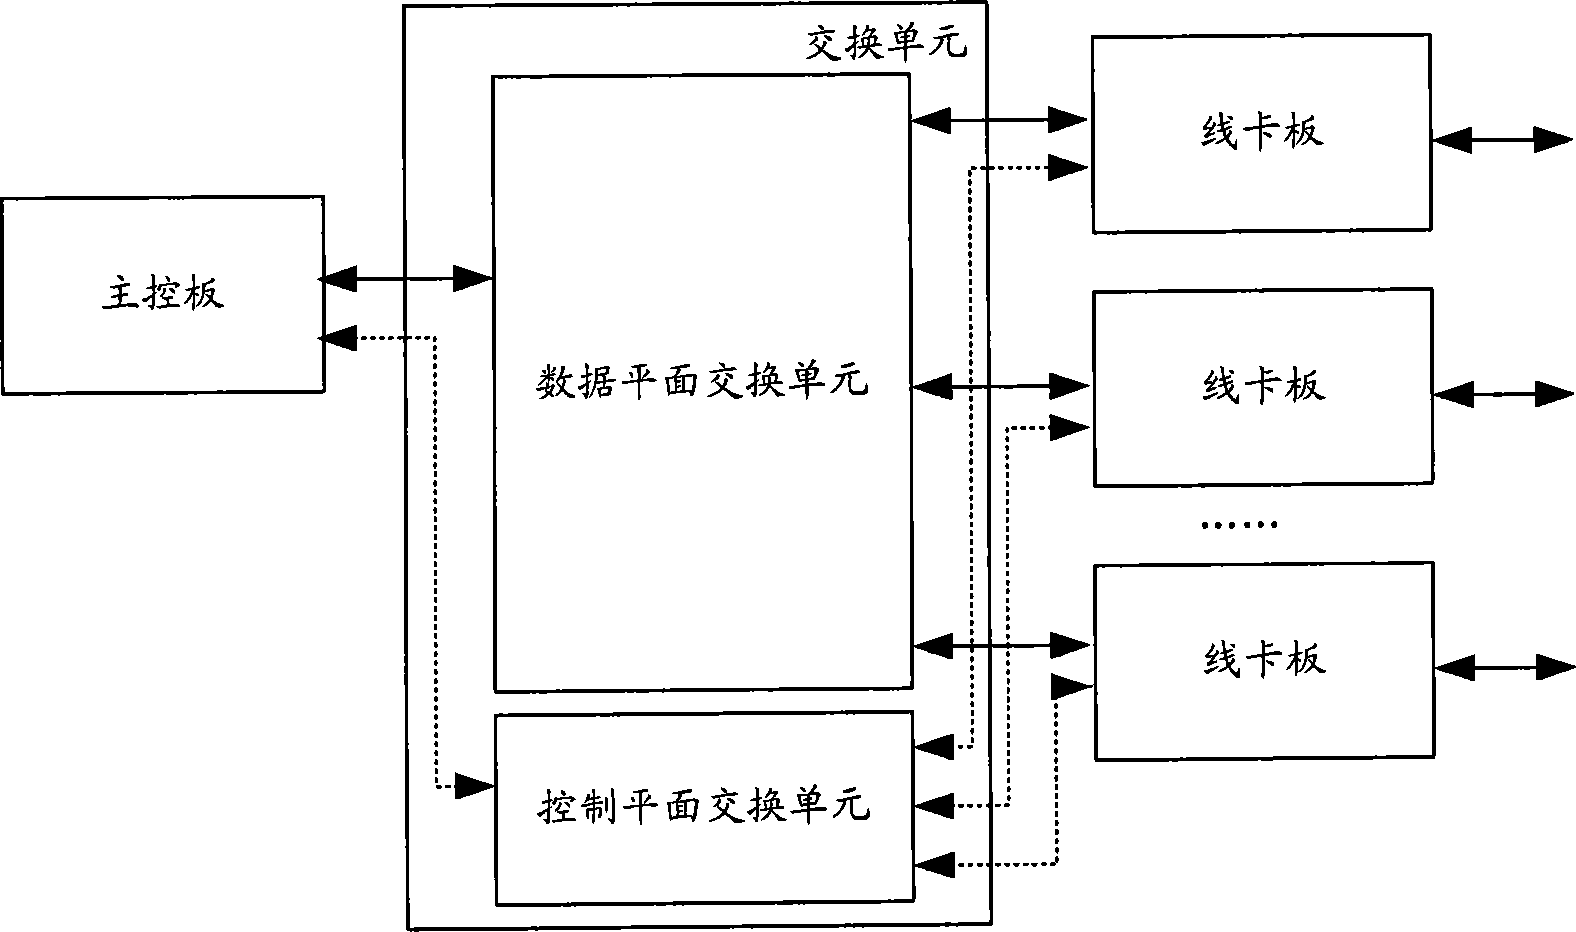 Switching network communicating system, method and master control board